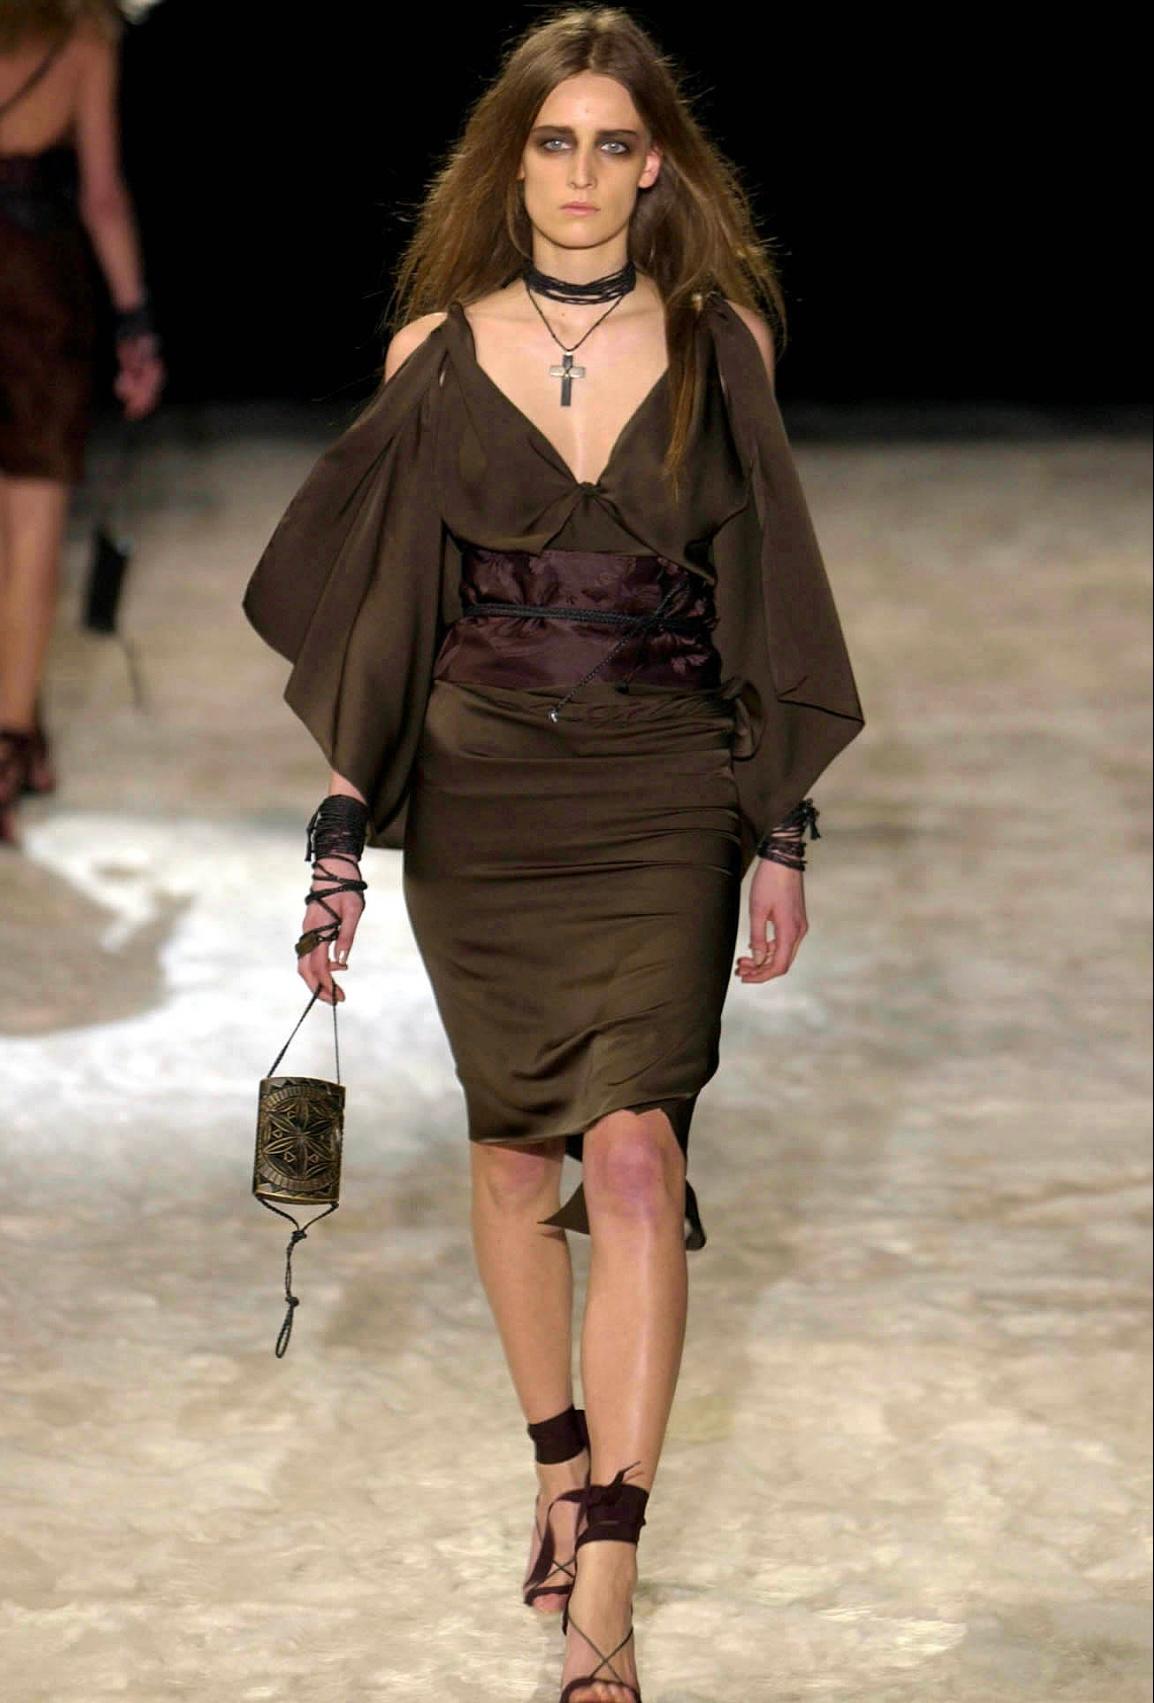 Presenting an incredible brown carved wood Gucci bag, designed by Tom Ford. From the Fall/Winter 2002 collection, this gothic and punk-rock-inspired bag debuted on the season's runway as part of look 29, modeled by Anne Catherine Lacroix. This